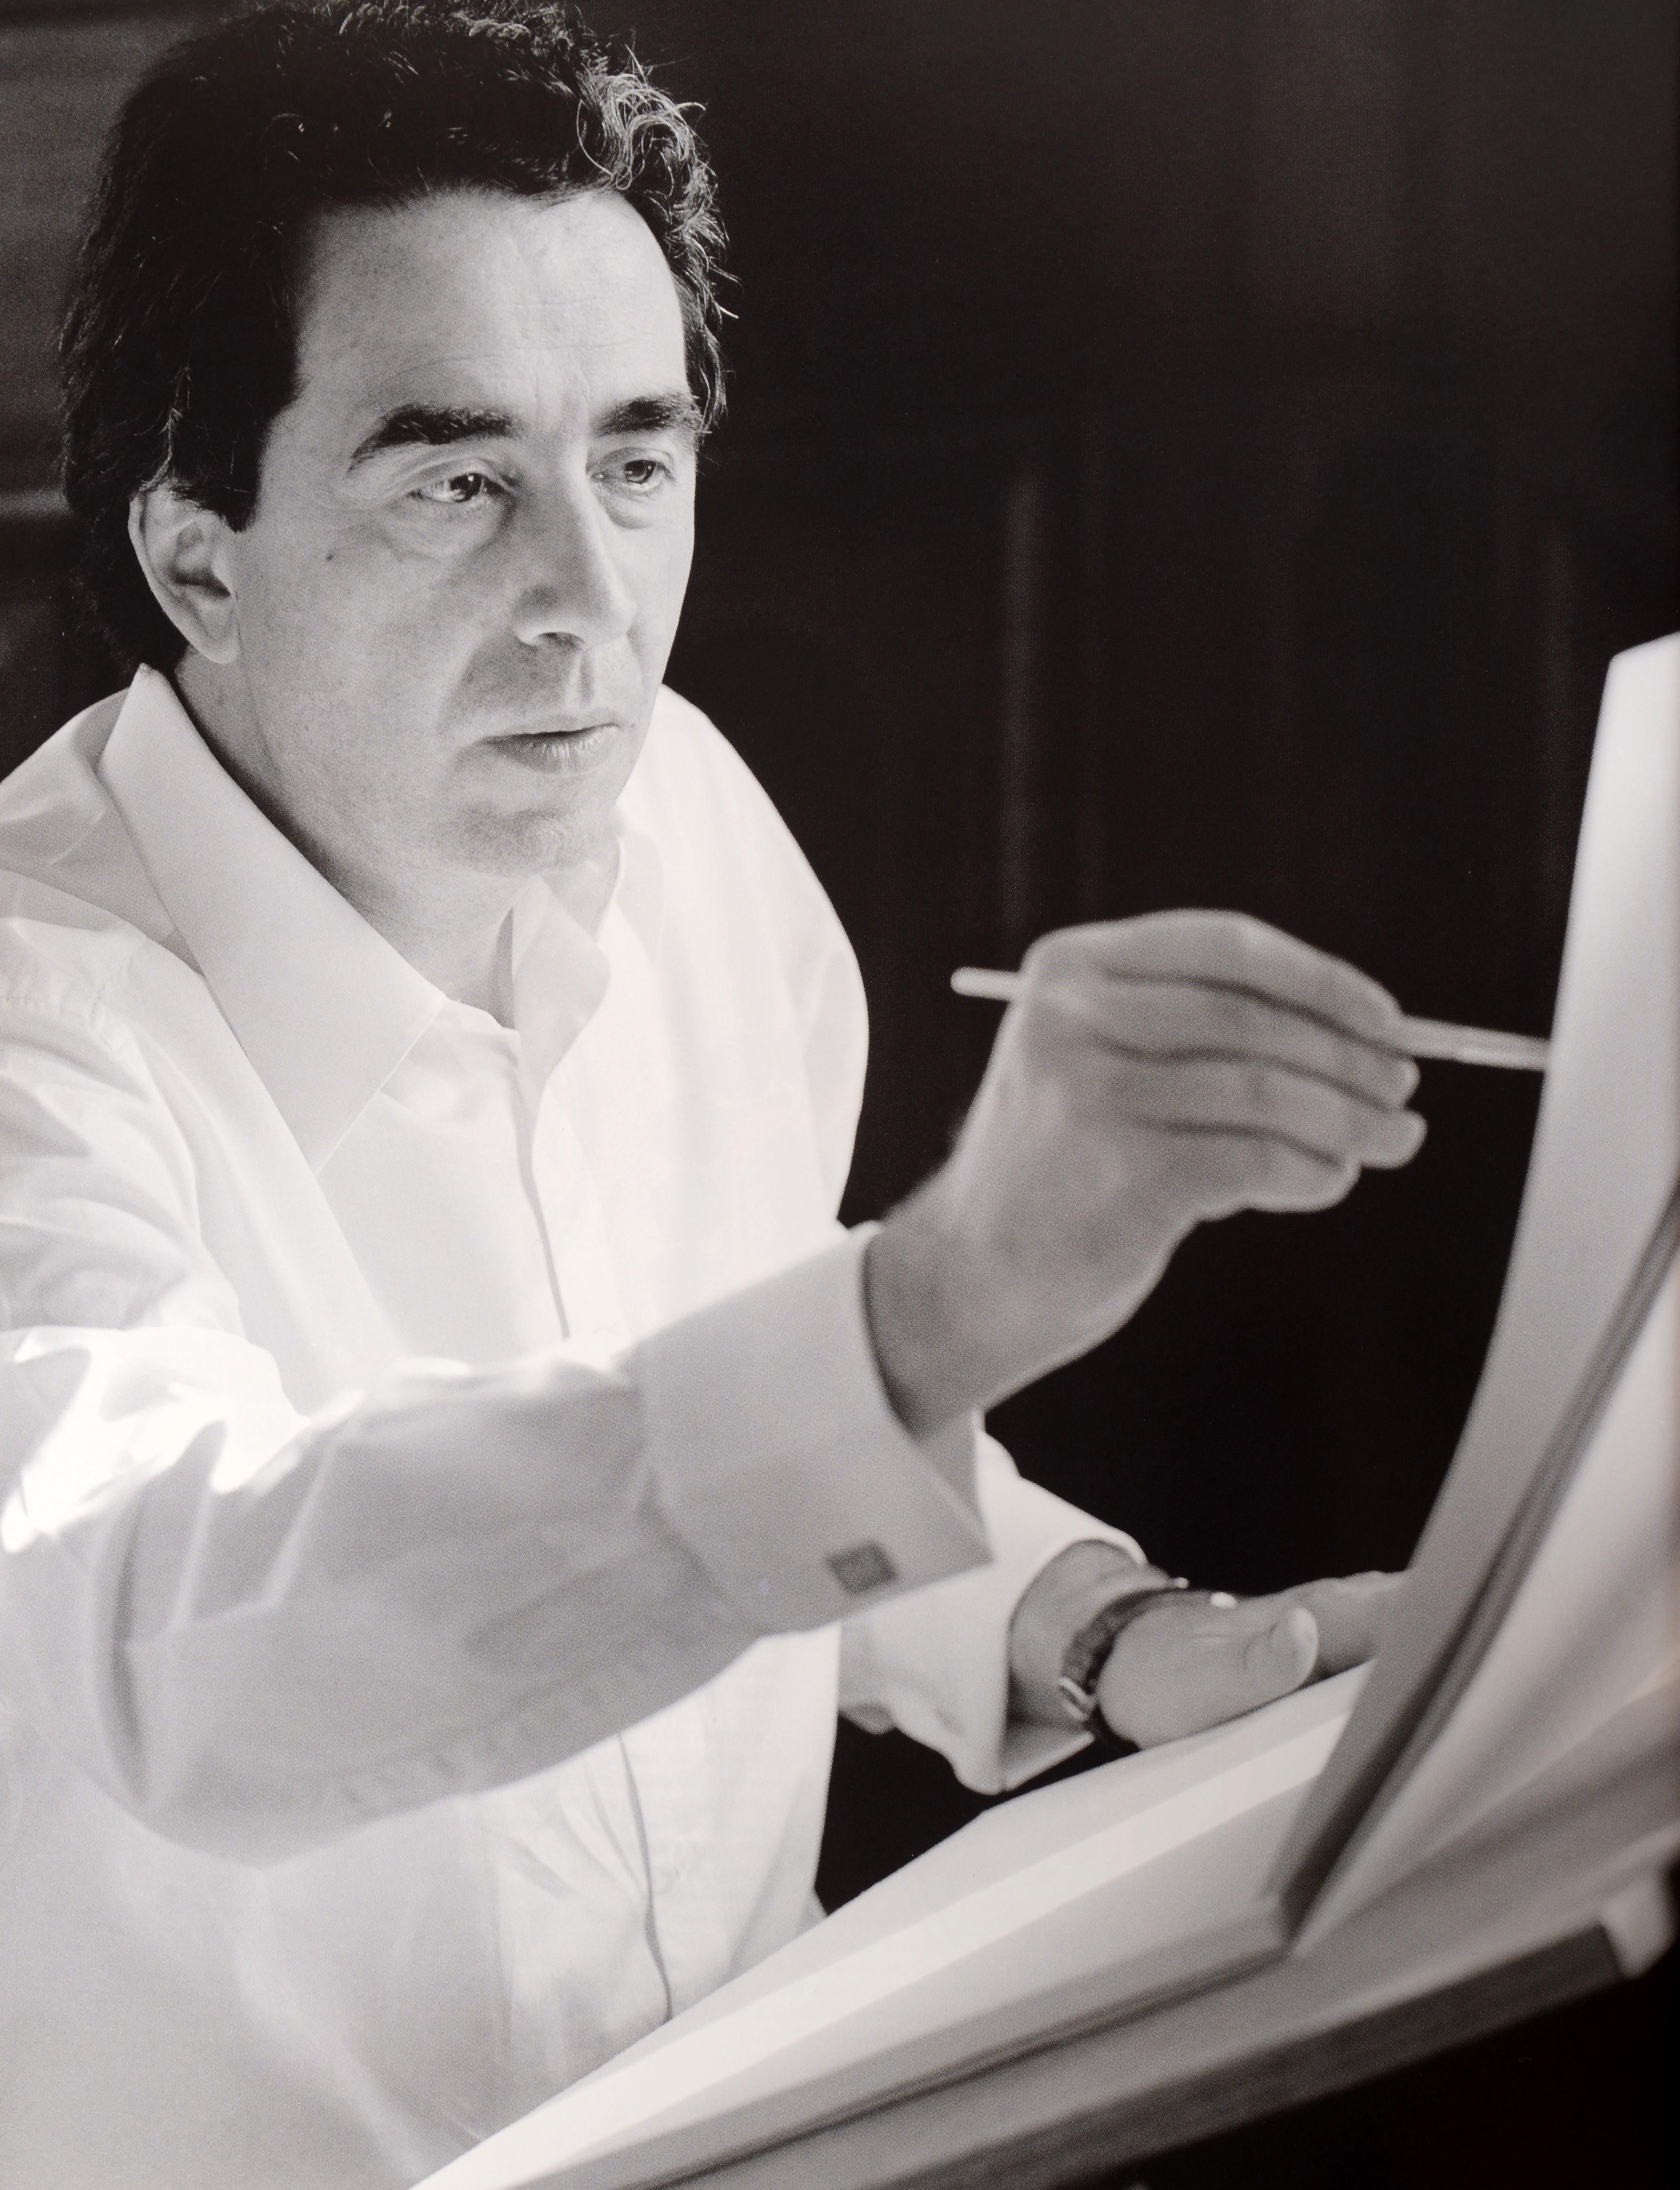 Santiago Calatrava: Complete Works 1979-2009 by Philip Jodidio. Publisher Taschen, 2009. 1st Ed hardcover with dust jacket, in English, French and German. Santiago Calatrava is one of the most innovative architects of the modern era. This book